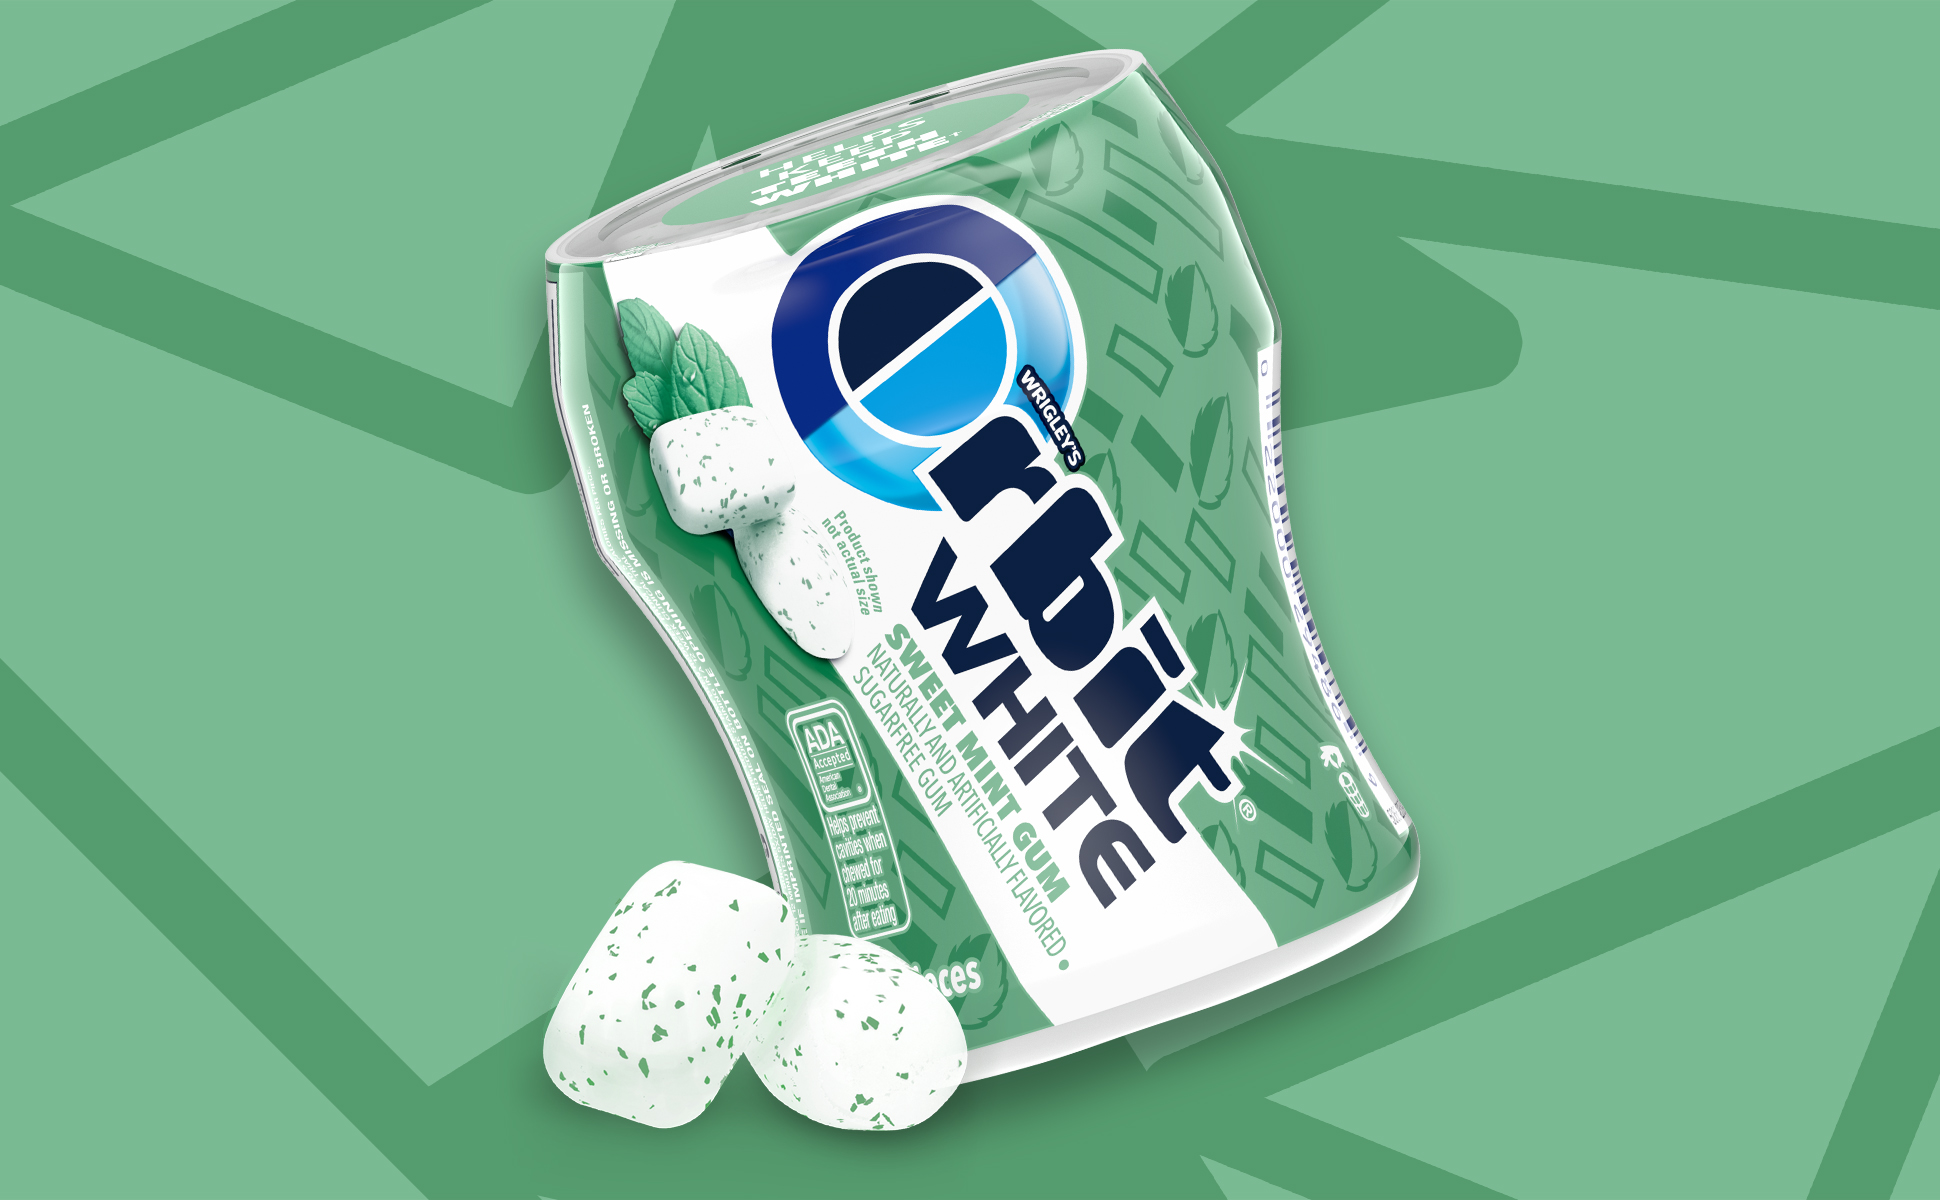 Orbit adds White Sweet Mint Gum to its lineup of soft chew items